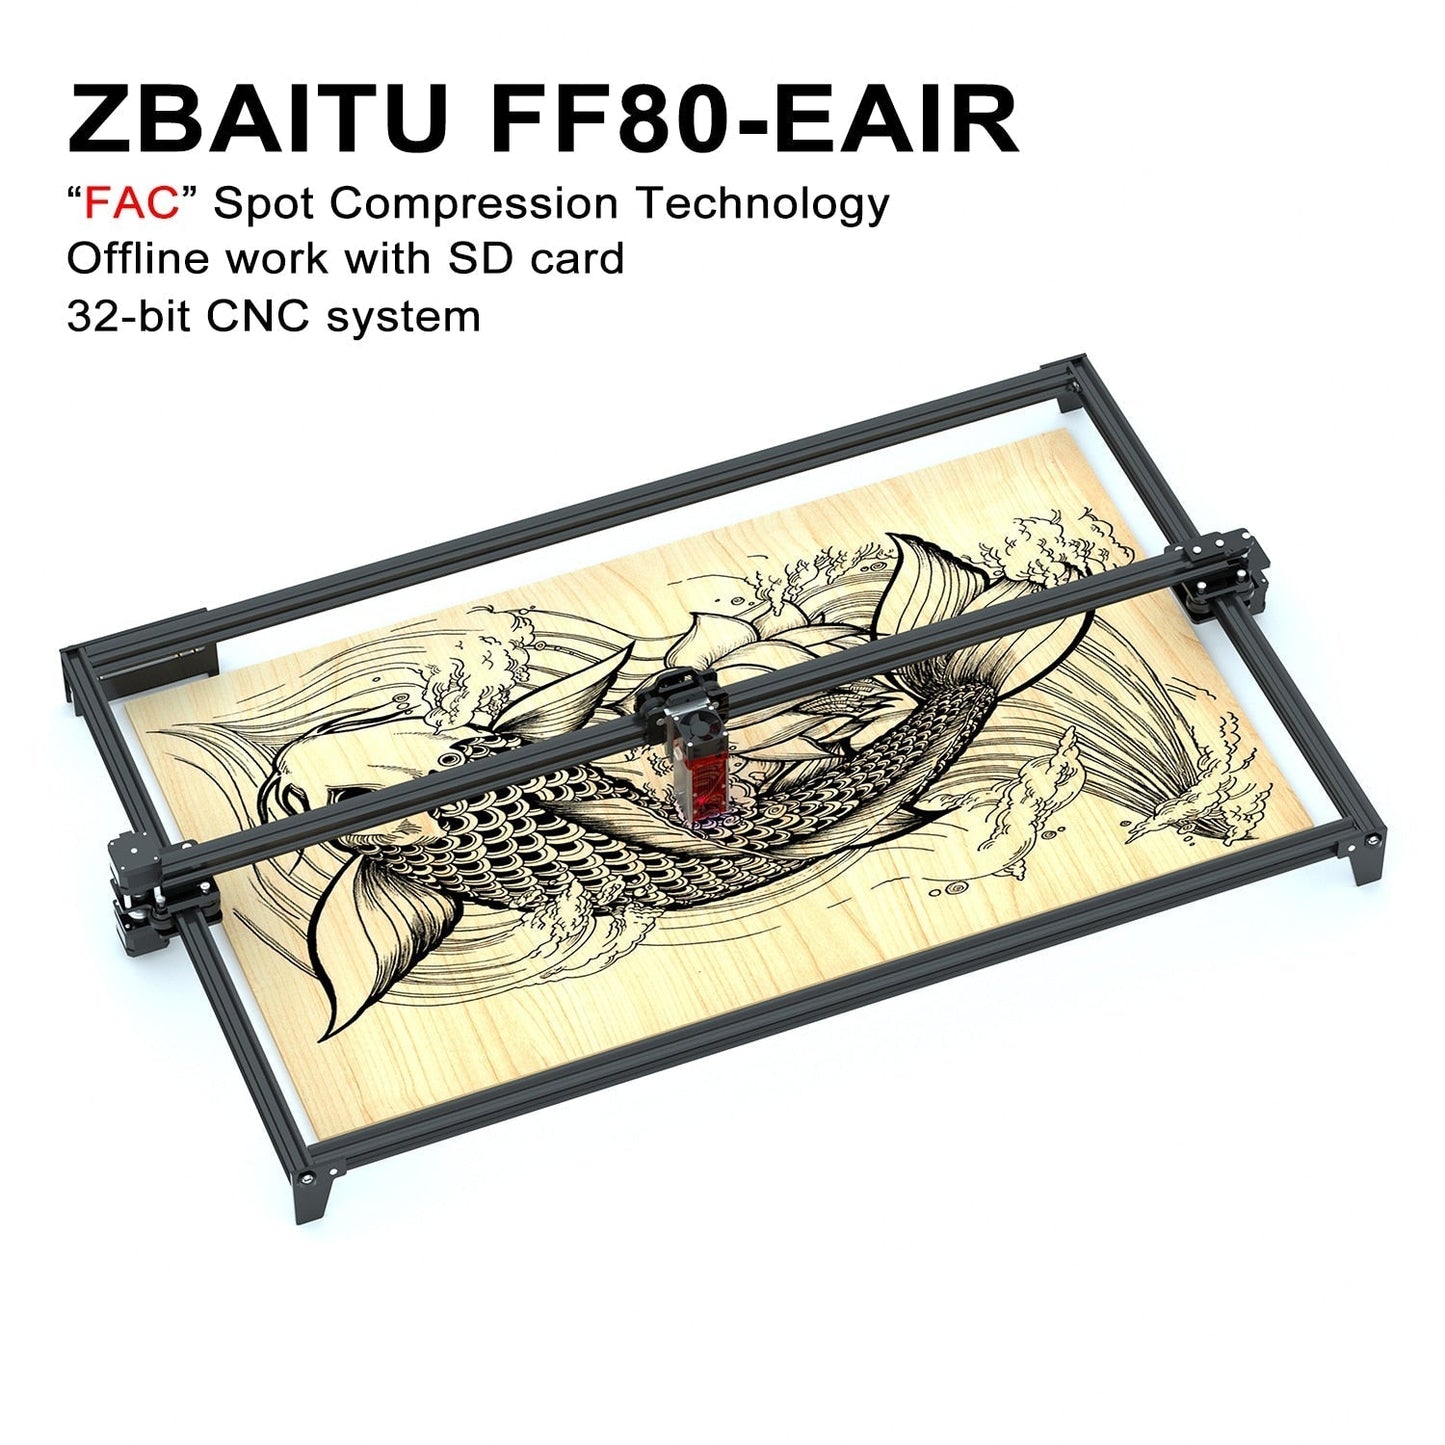 40-80W Laser Engraving Machine for Wood, Leather & Metal with CNC, FAC Wifi & Optical Output M81-FF80-EAIR